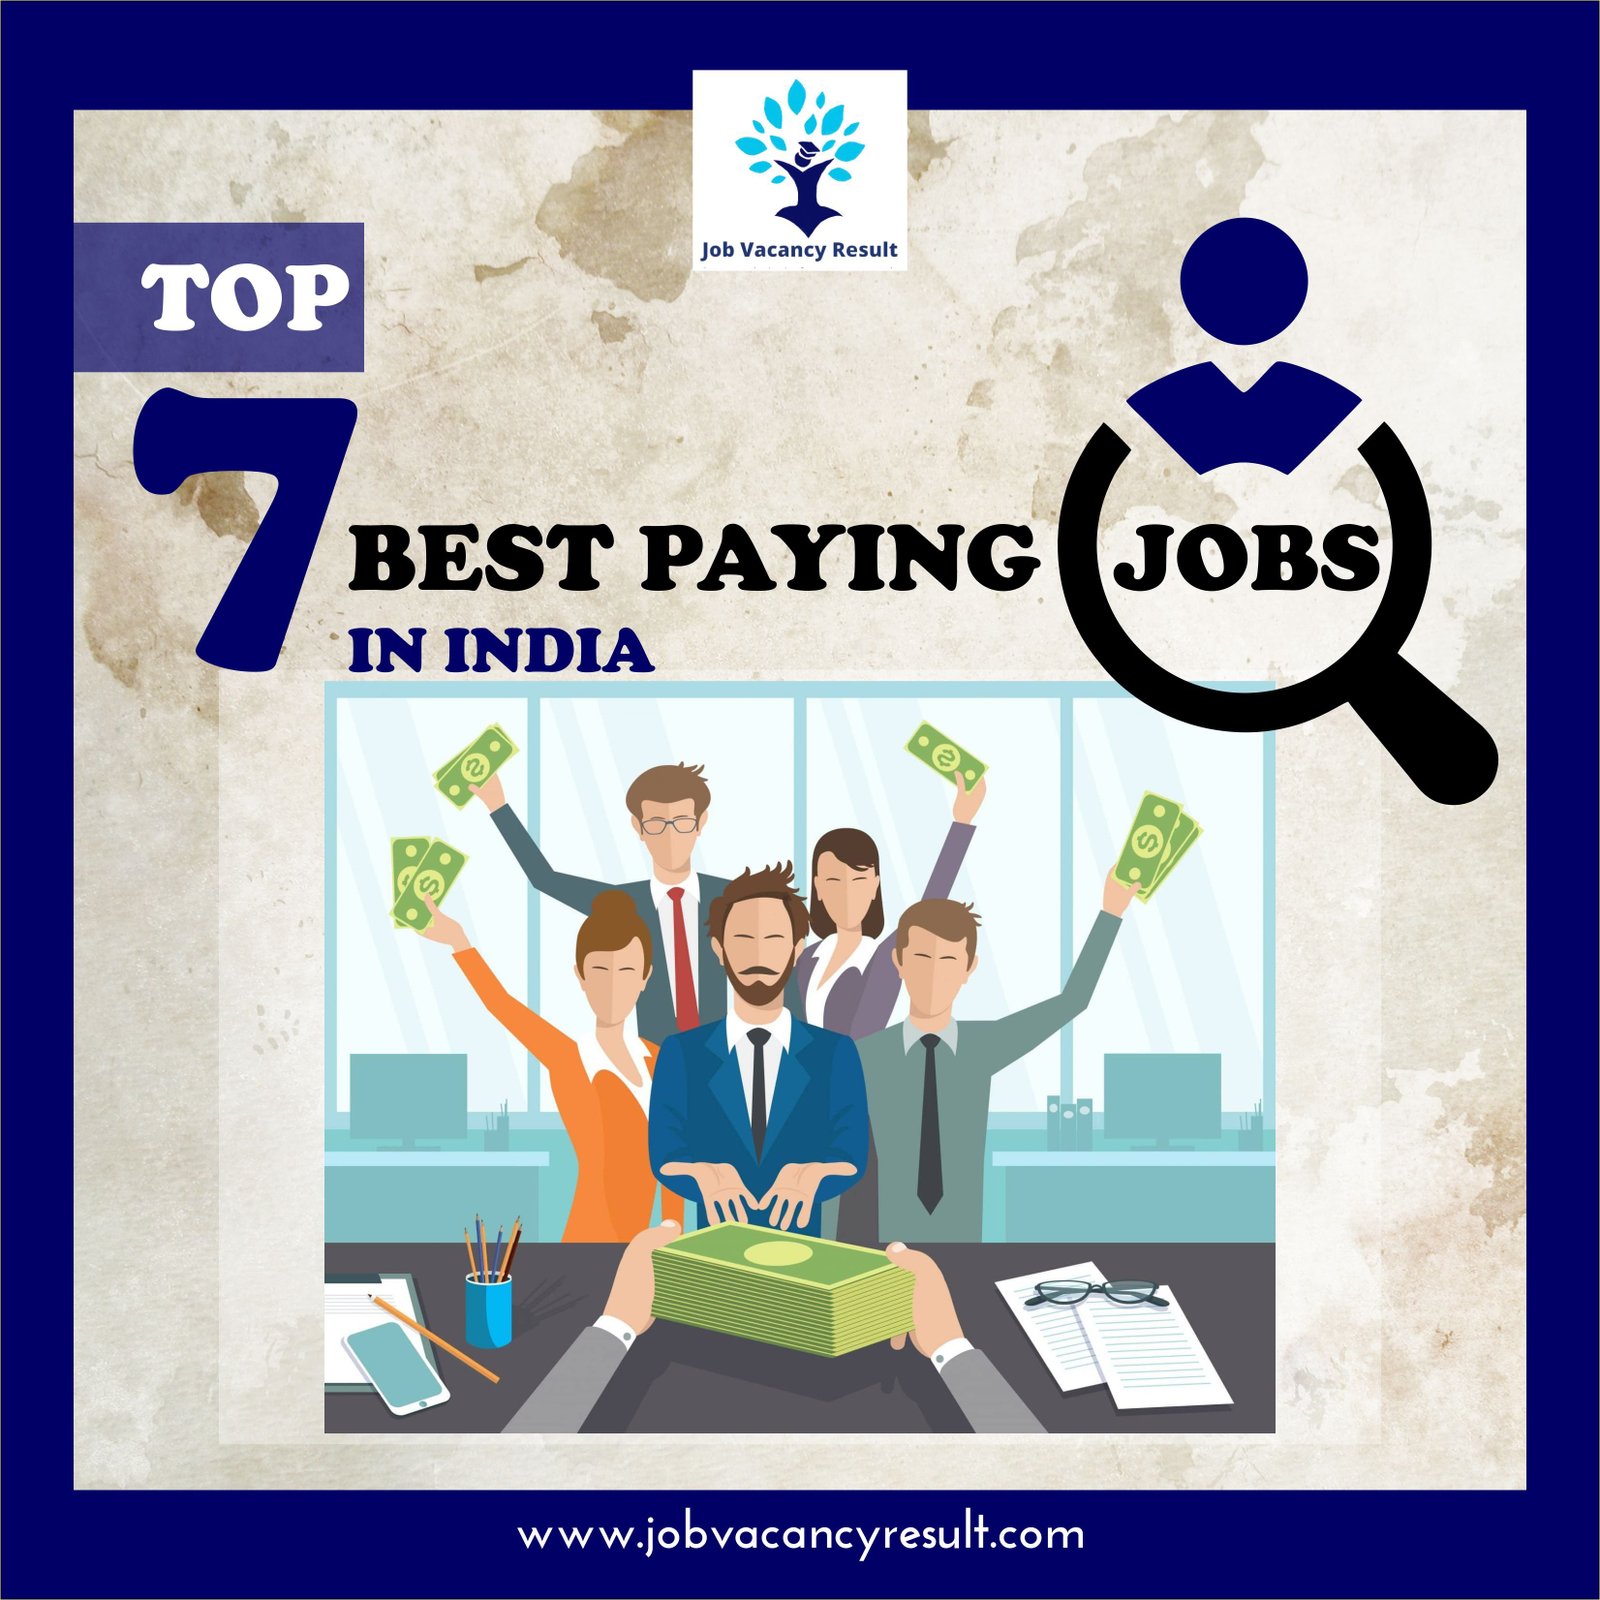 Top 7 Best Paying Jobs in India